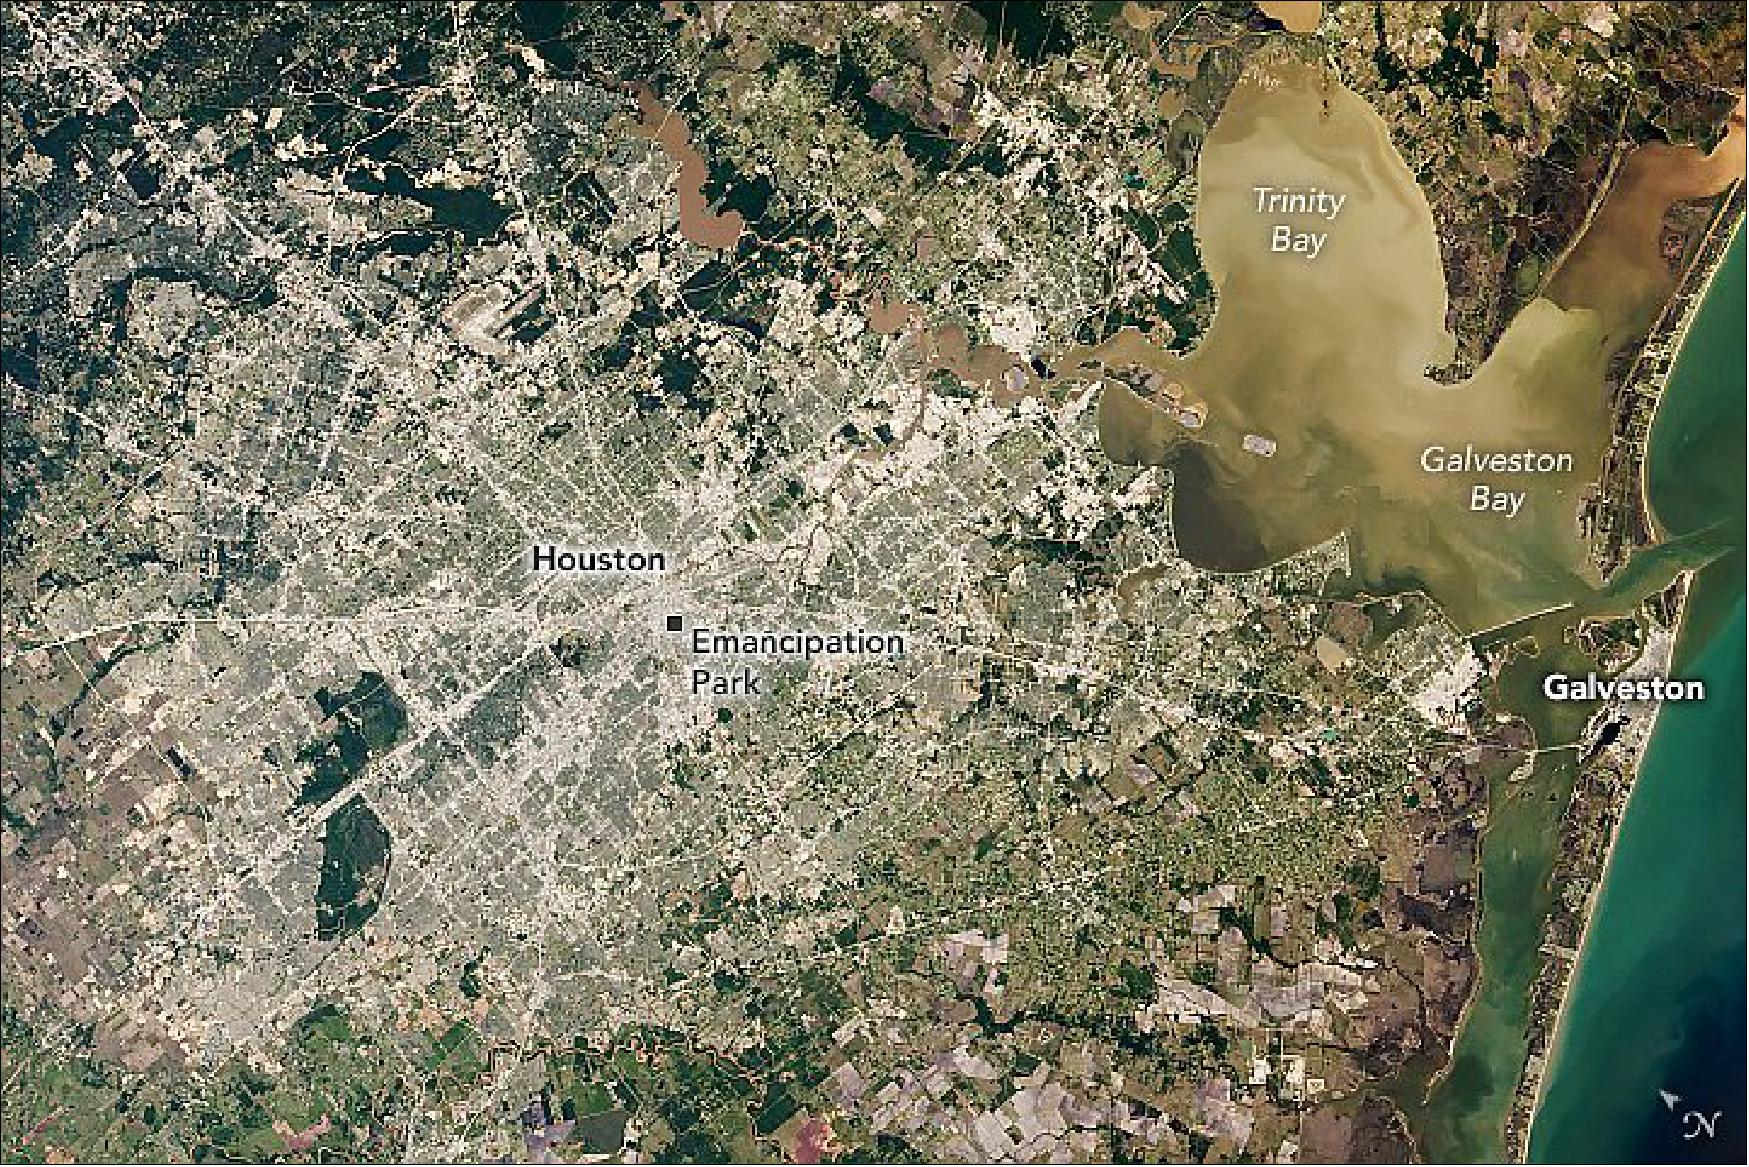 Figure 66: Photo of the Houston area from the ISS taken on 16 April 2019 (image credit: NASA Earth Observatory)